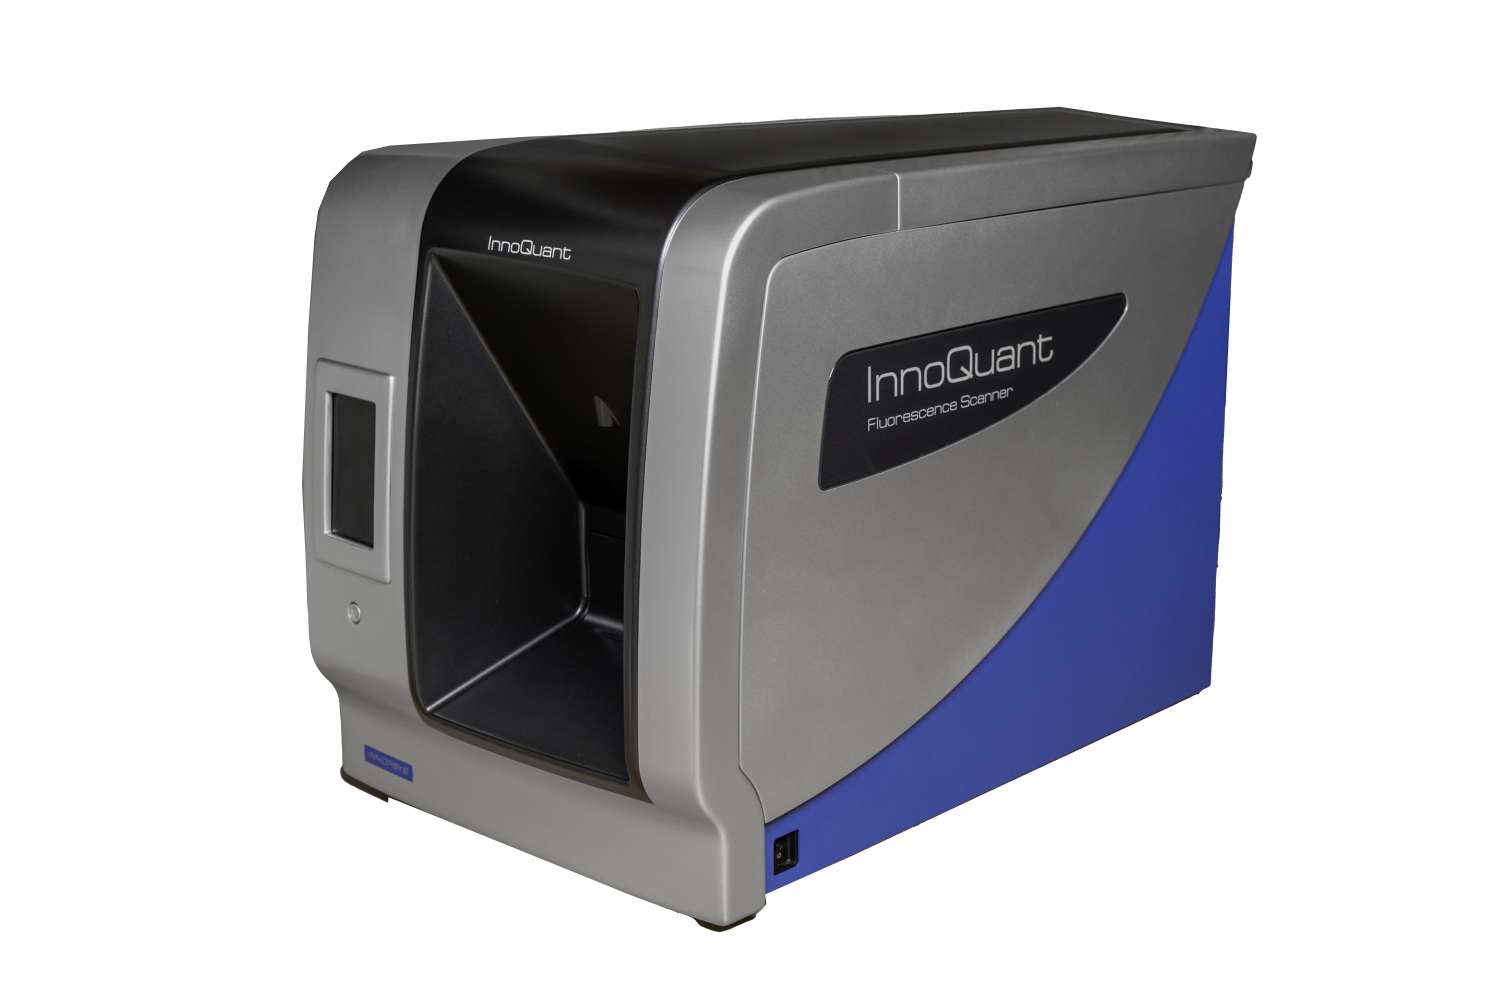 Photo of a machine called InnoQuant, a Product by Innopsys